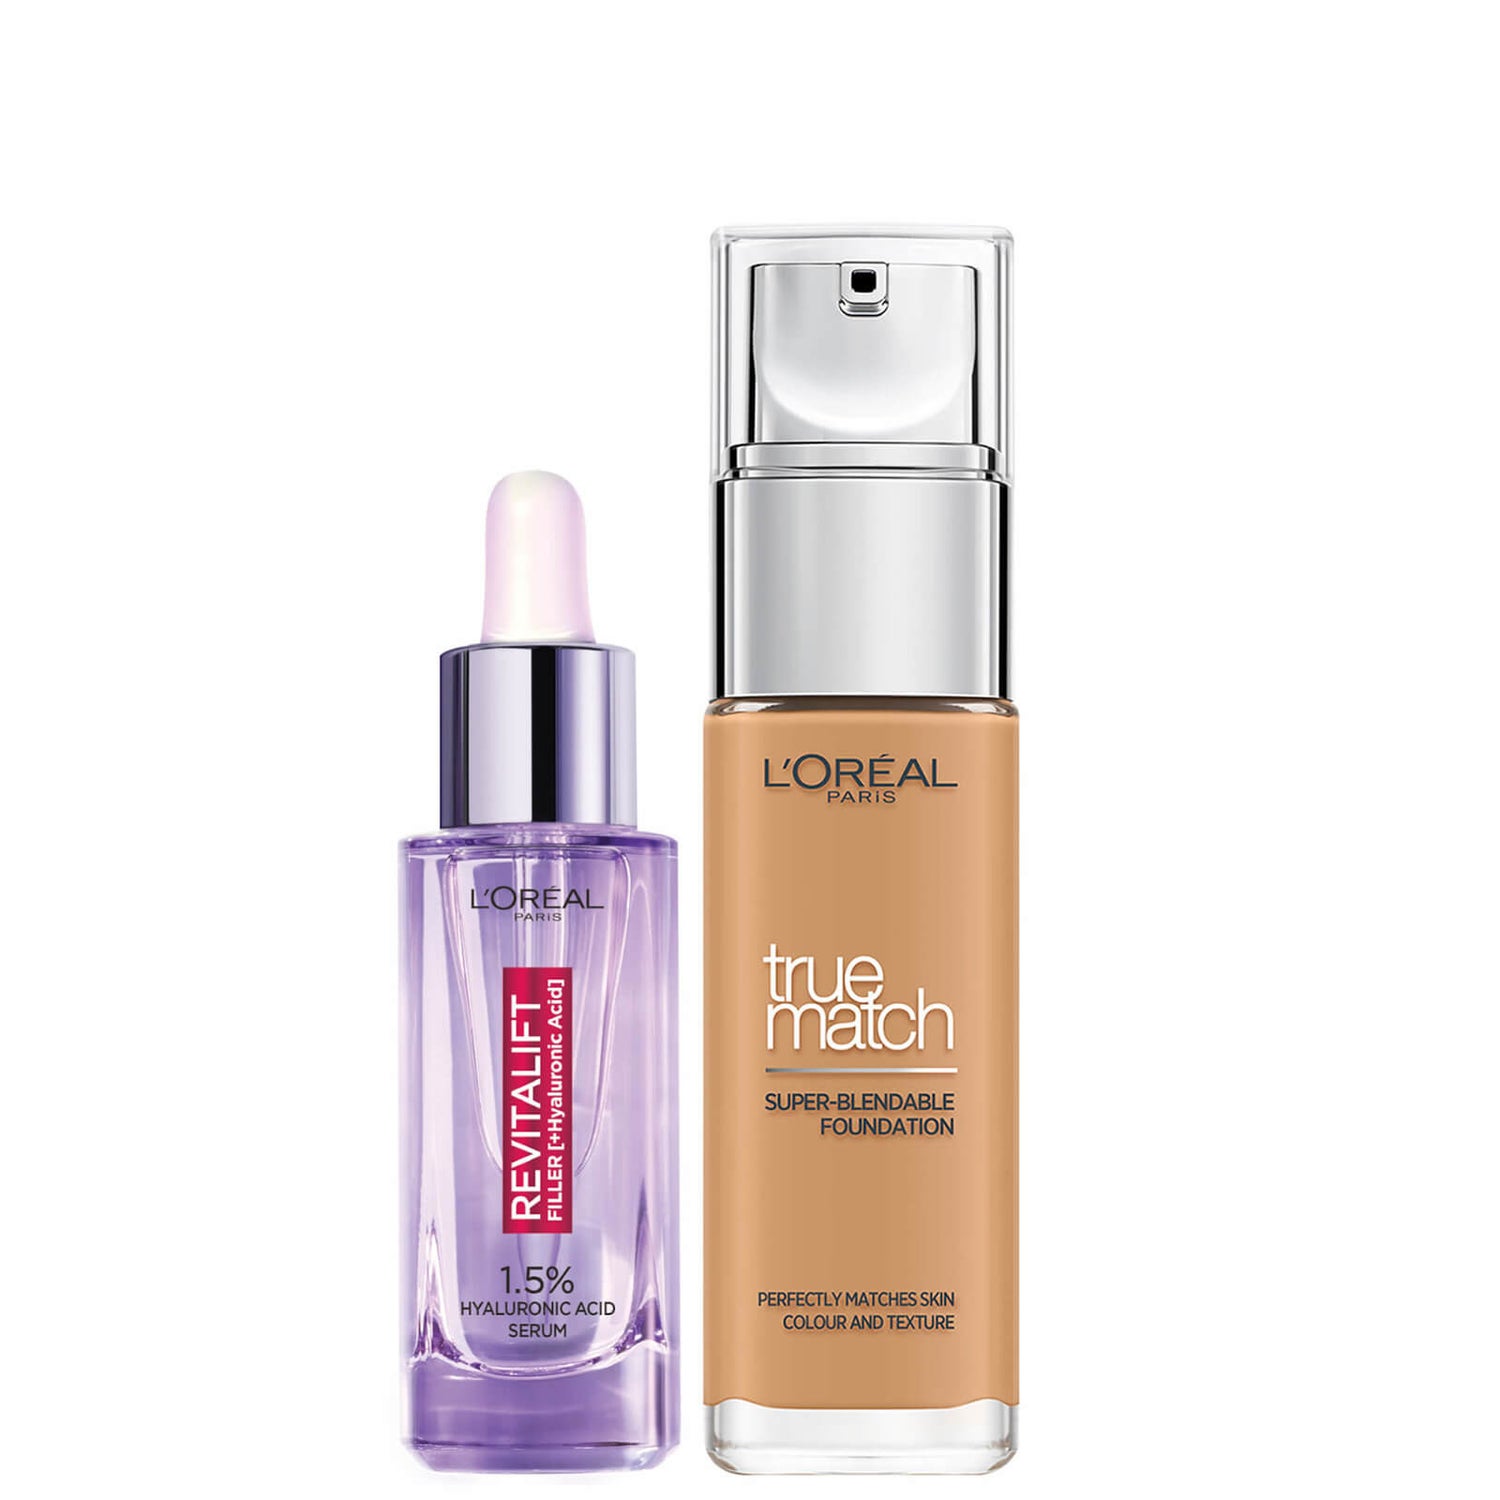 L’Oreal Paris Hyaluronic Acid Filler Serum and True Match Hyaluronic Acid Foundation Duo (Various Shades)